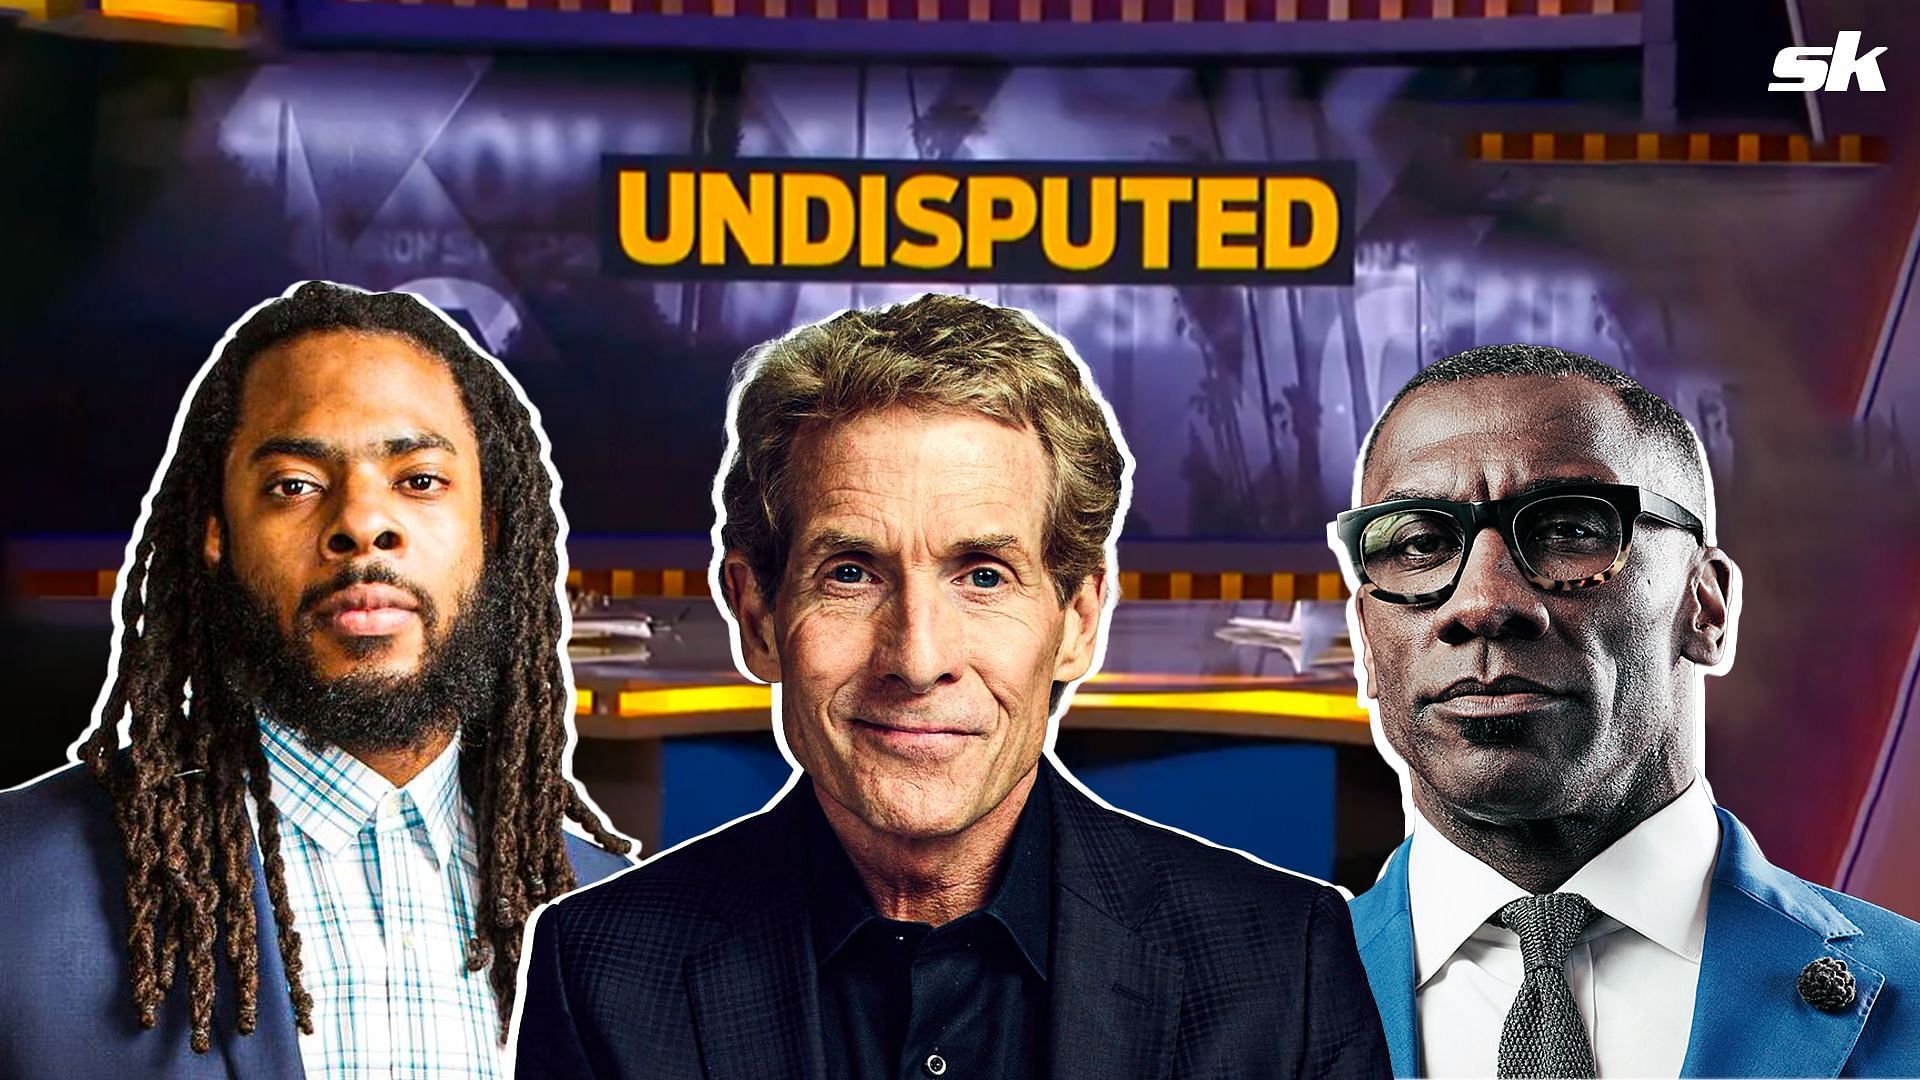 Skip Bayless is likley to team up with Richard Sherman on Undisputed